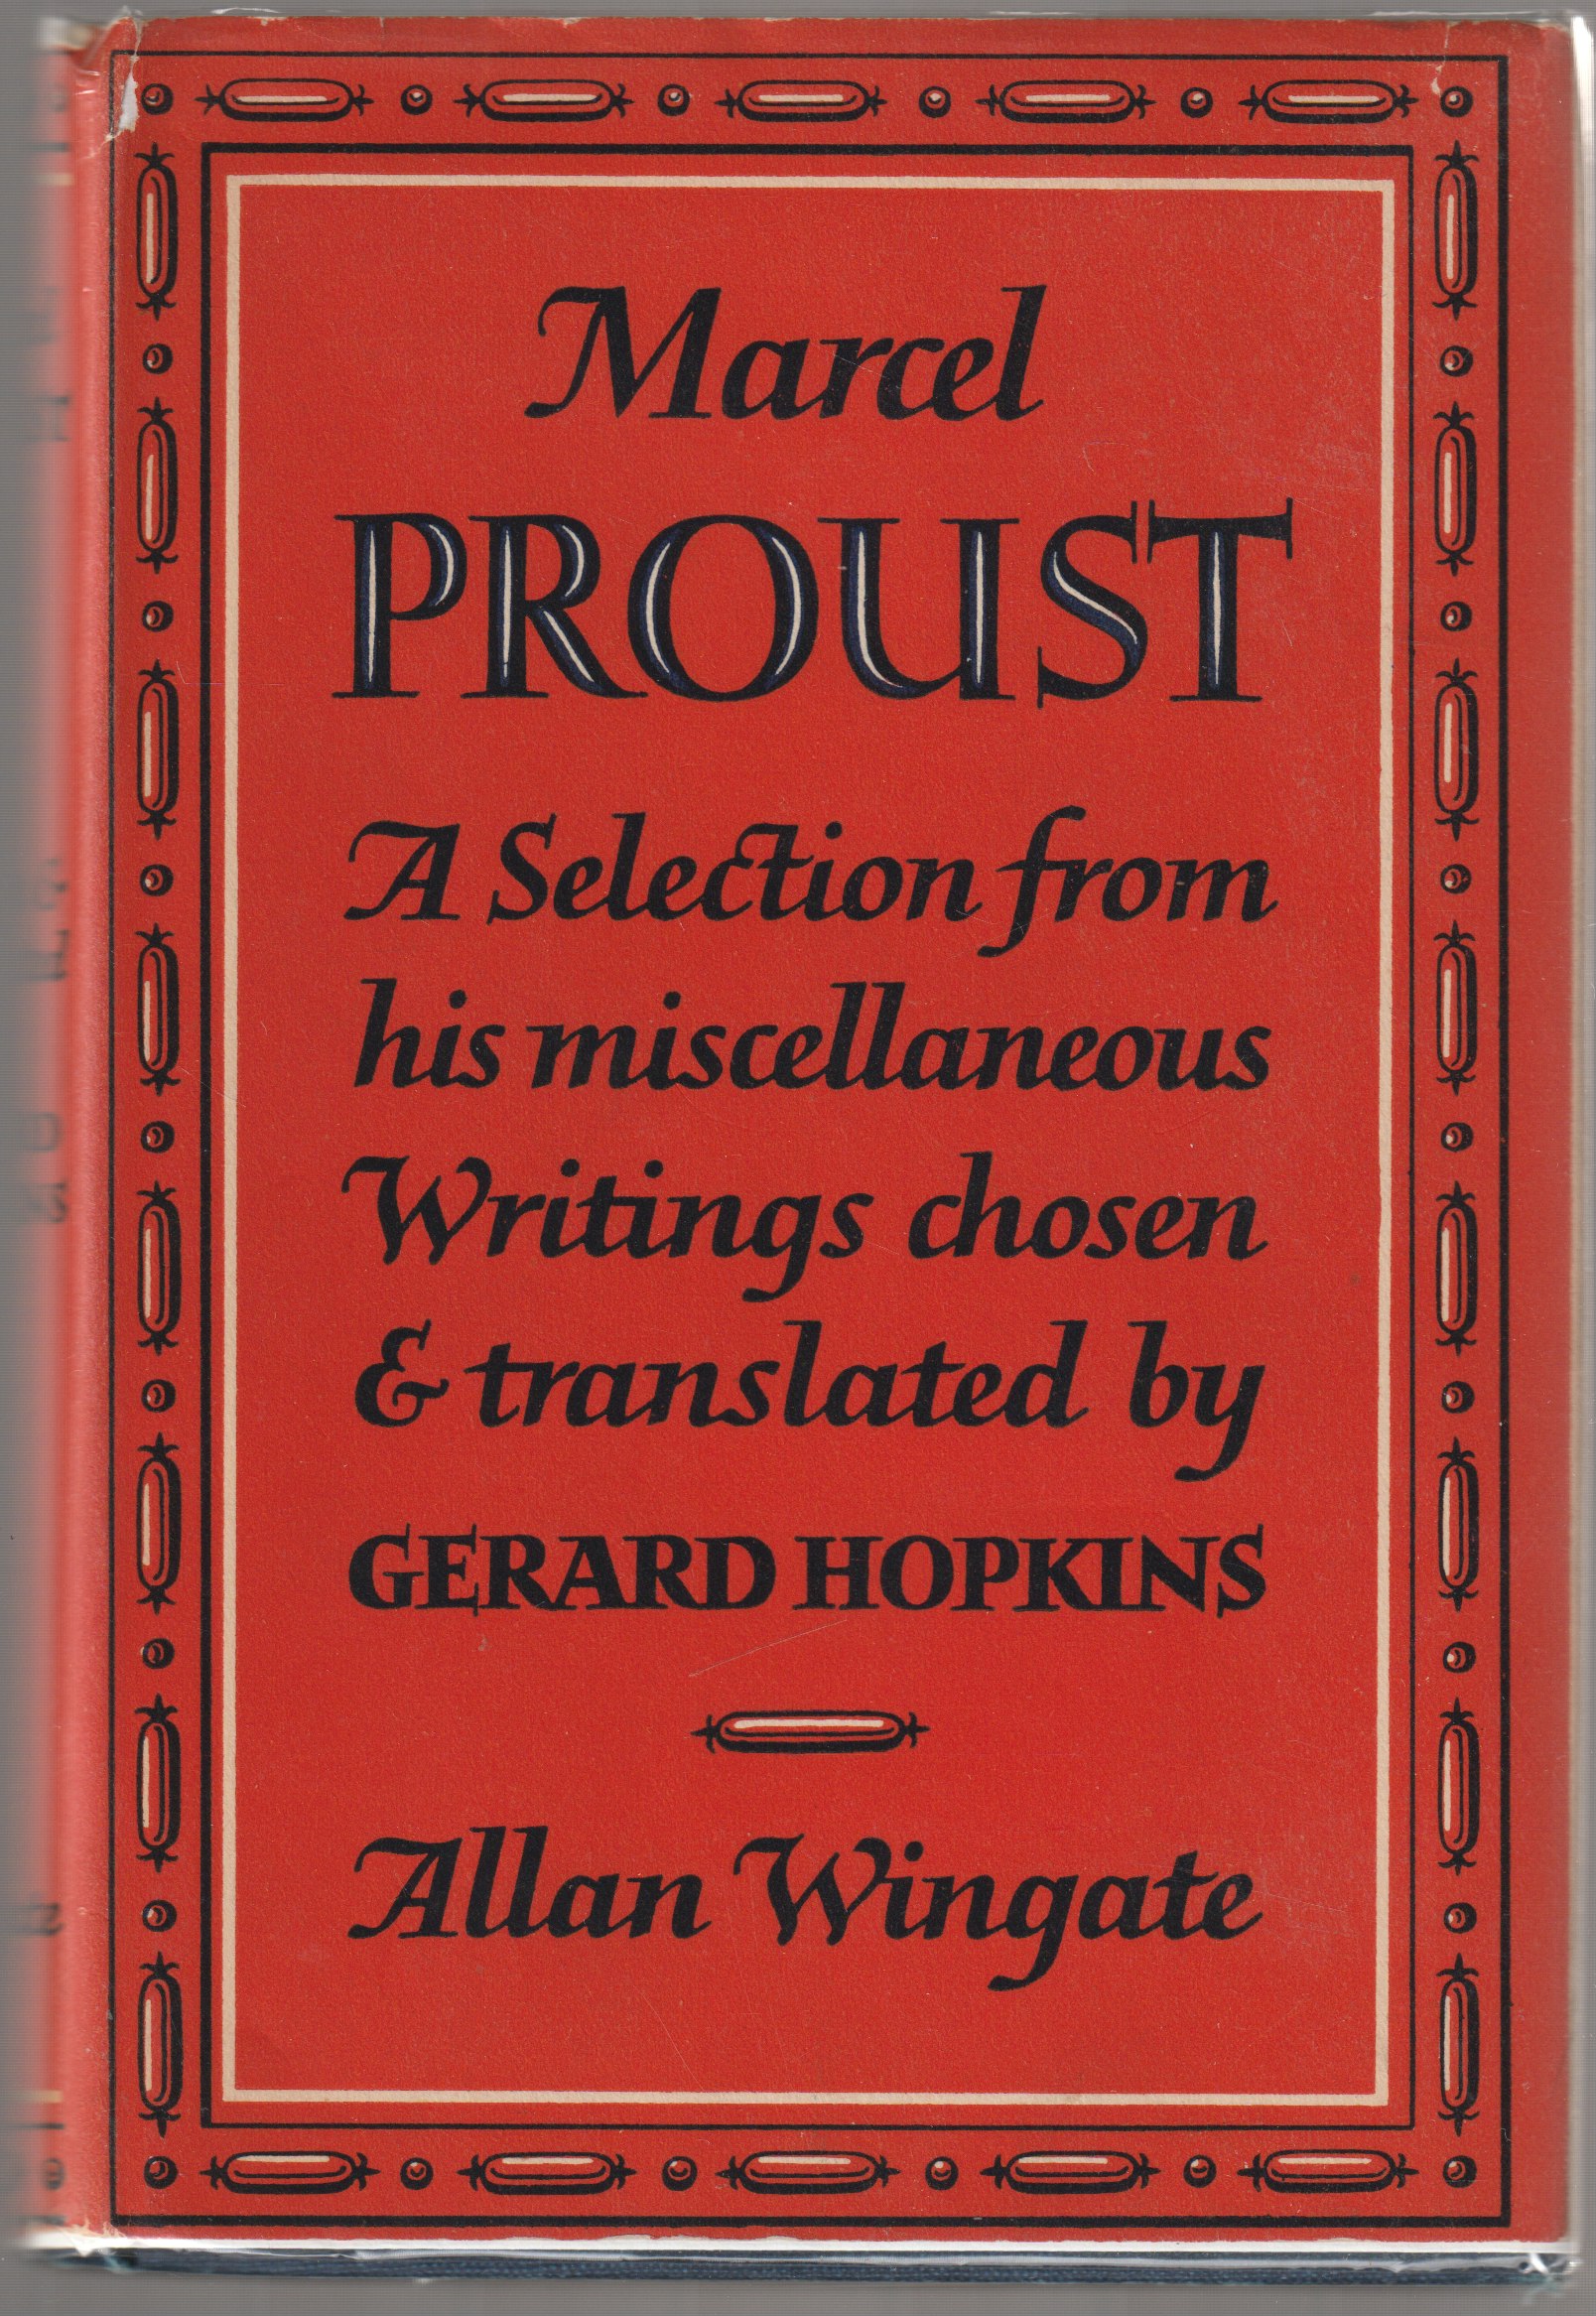 Marcel Proust : a selection from his miscellaneous writings.